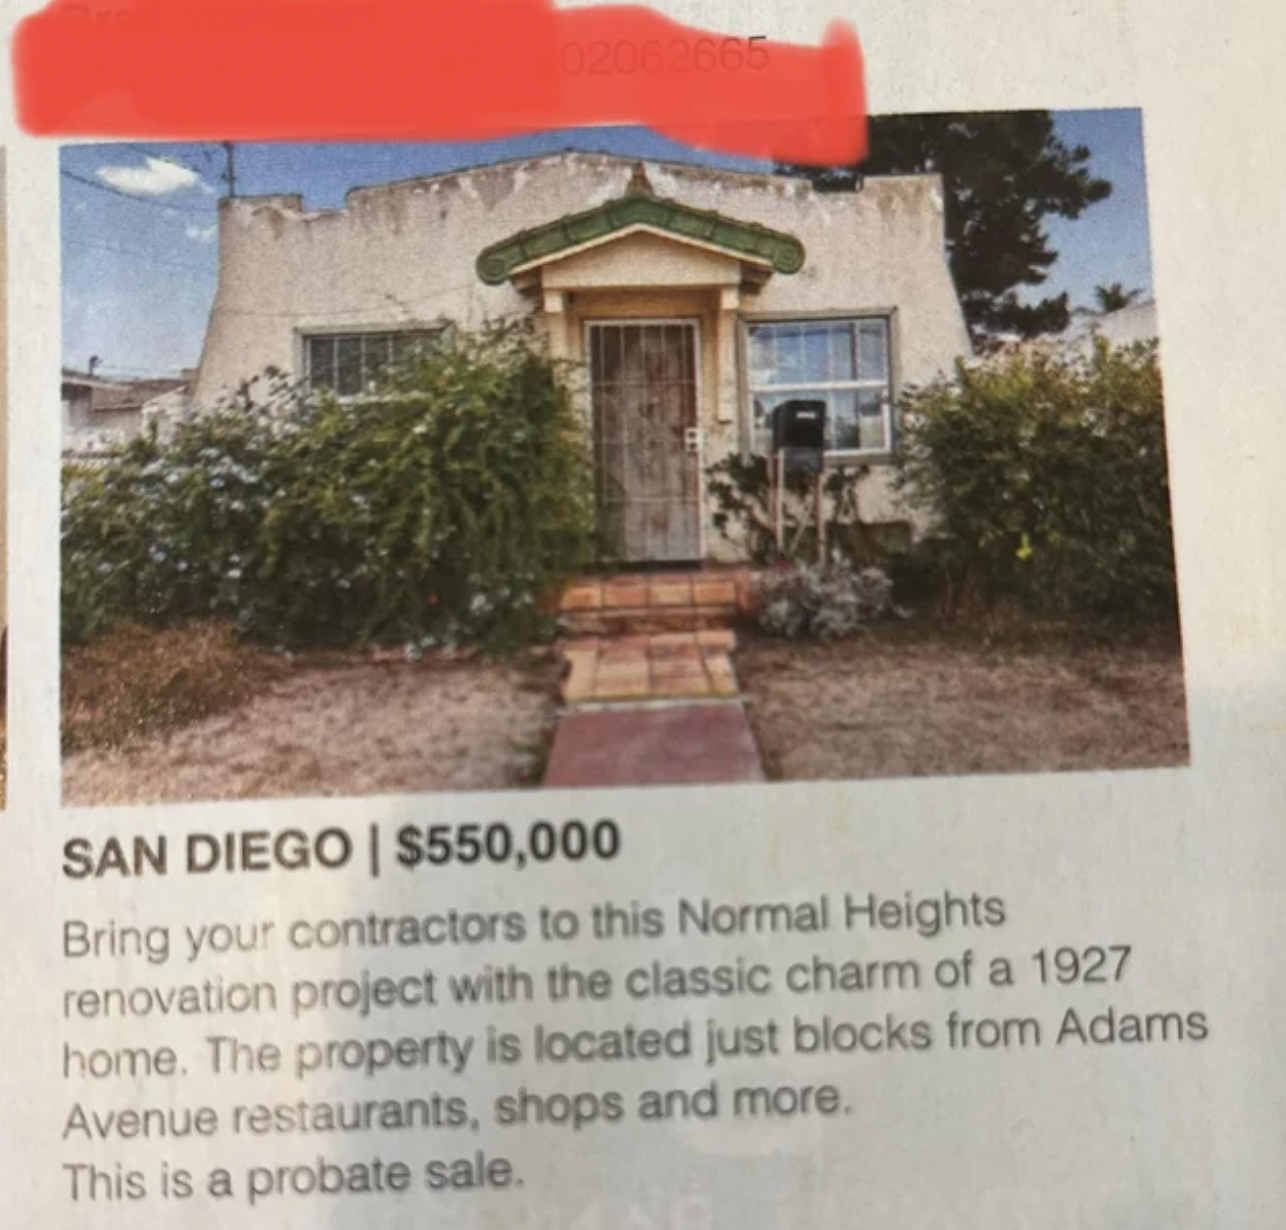 Facepalms and Fails - San Diego | $550,000 Bring your contractors to this Normal Heights renovation project with the classic charm of a 1927 home. The property is located just blocks from Adams Avenue restaurants, shops and more. This is a probate sale.